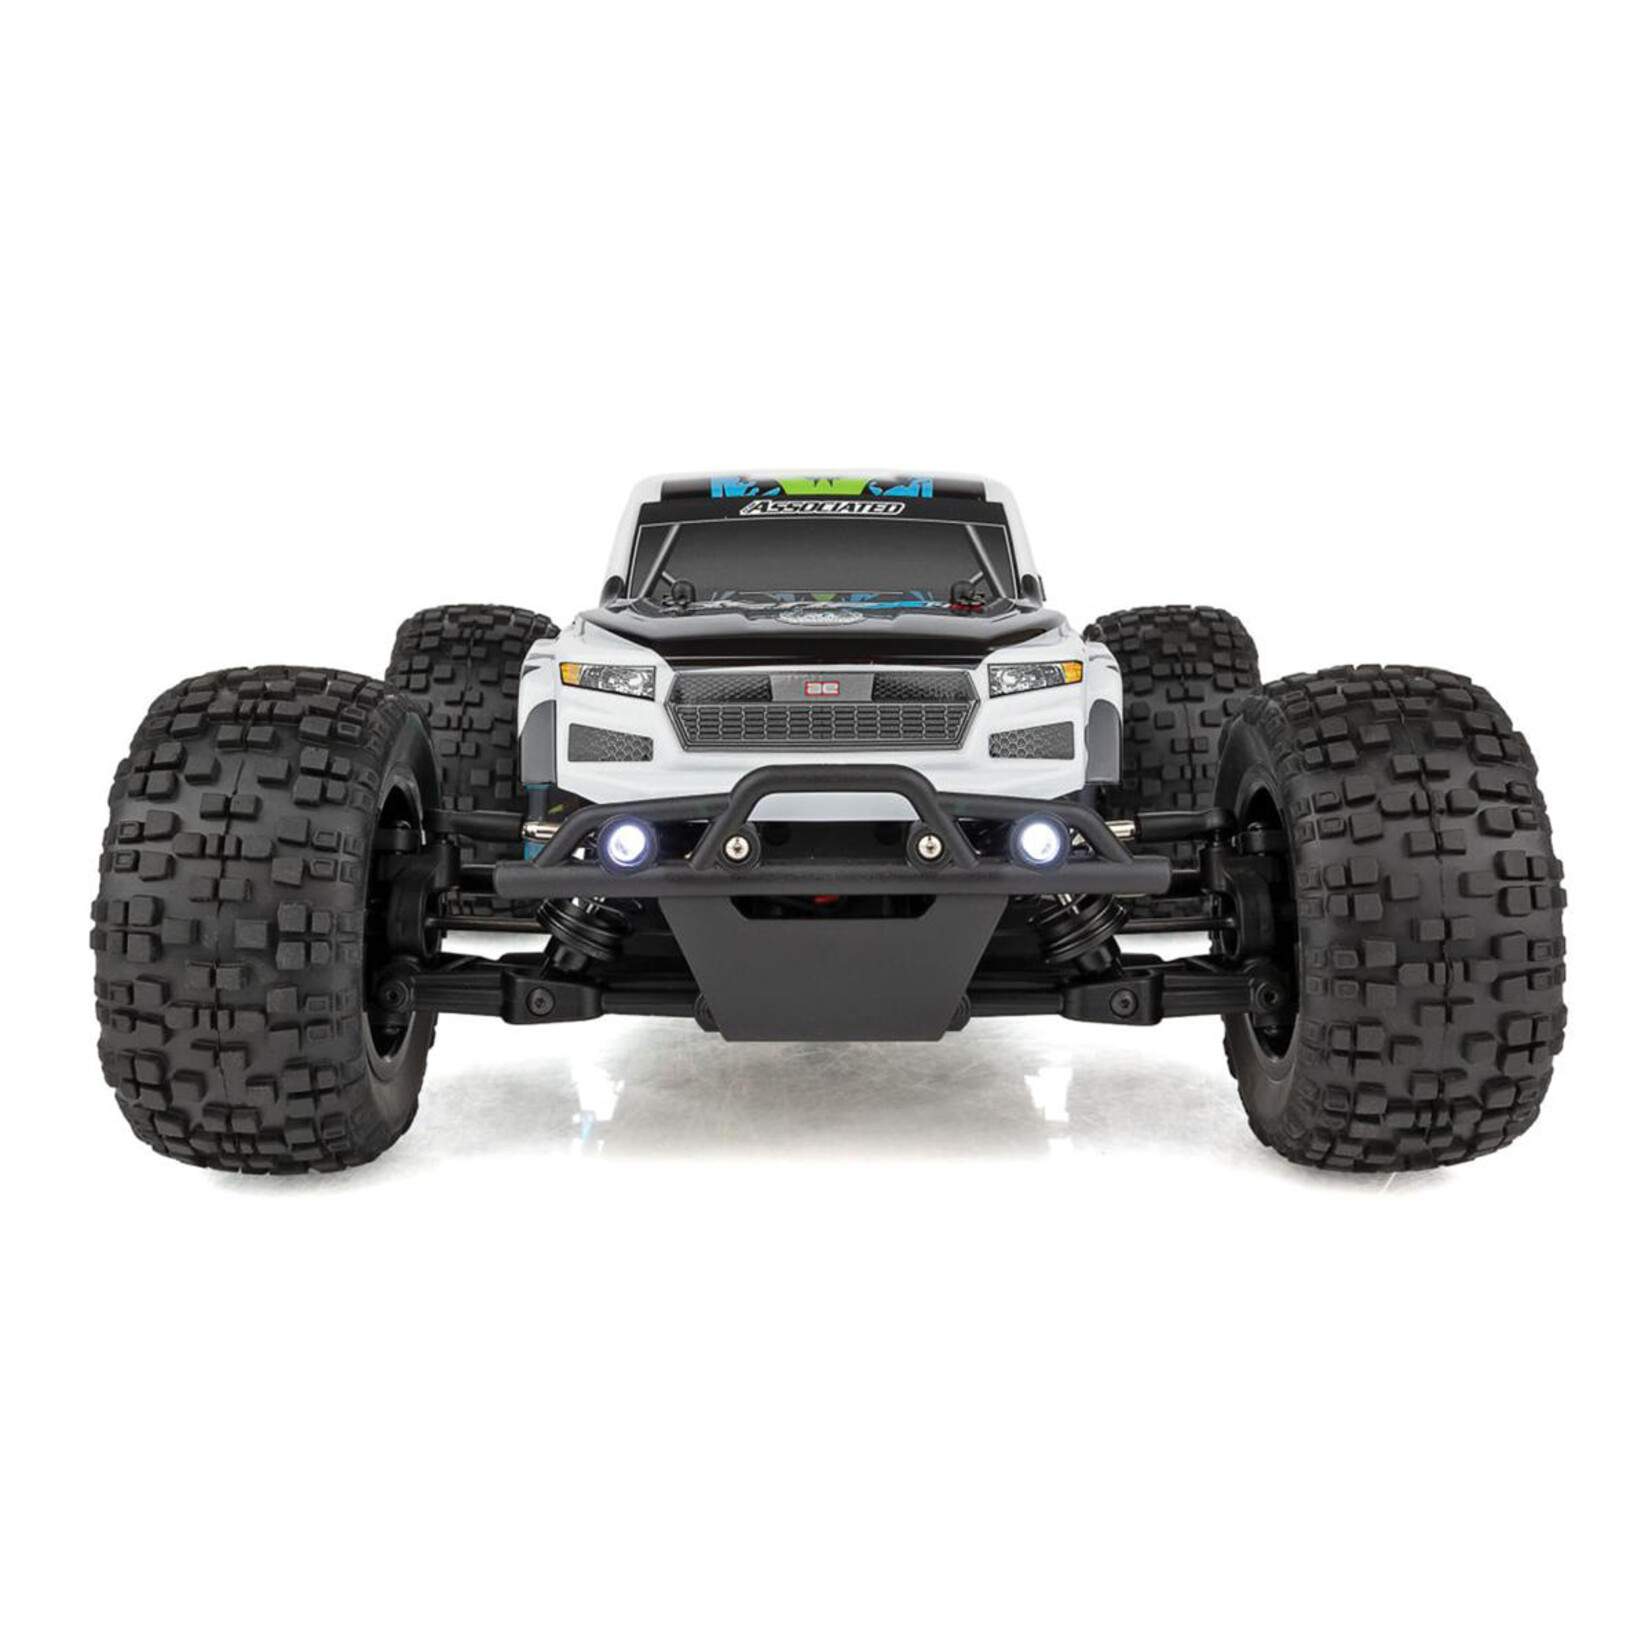 Team Associated Team Associated Reflex 14MT 1/14 RTR 4WD Brushless Mini Monster Truck Combo w/2.4GHz Radio, Battery & Charger #20174C